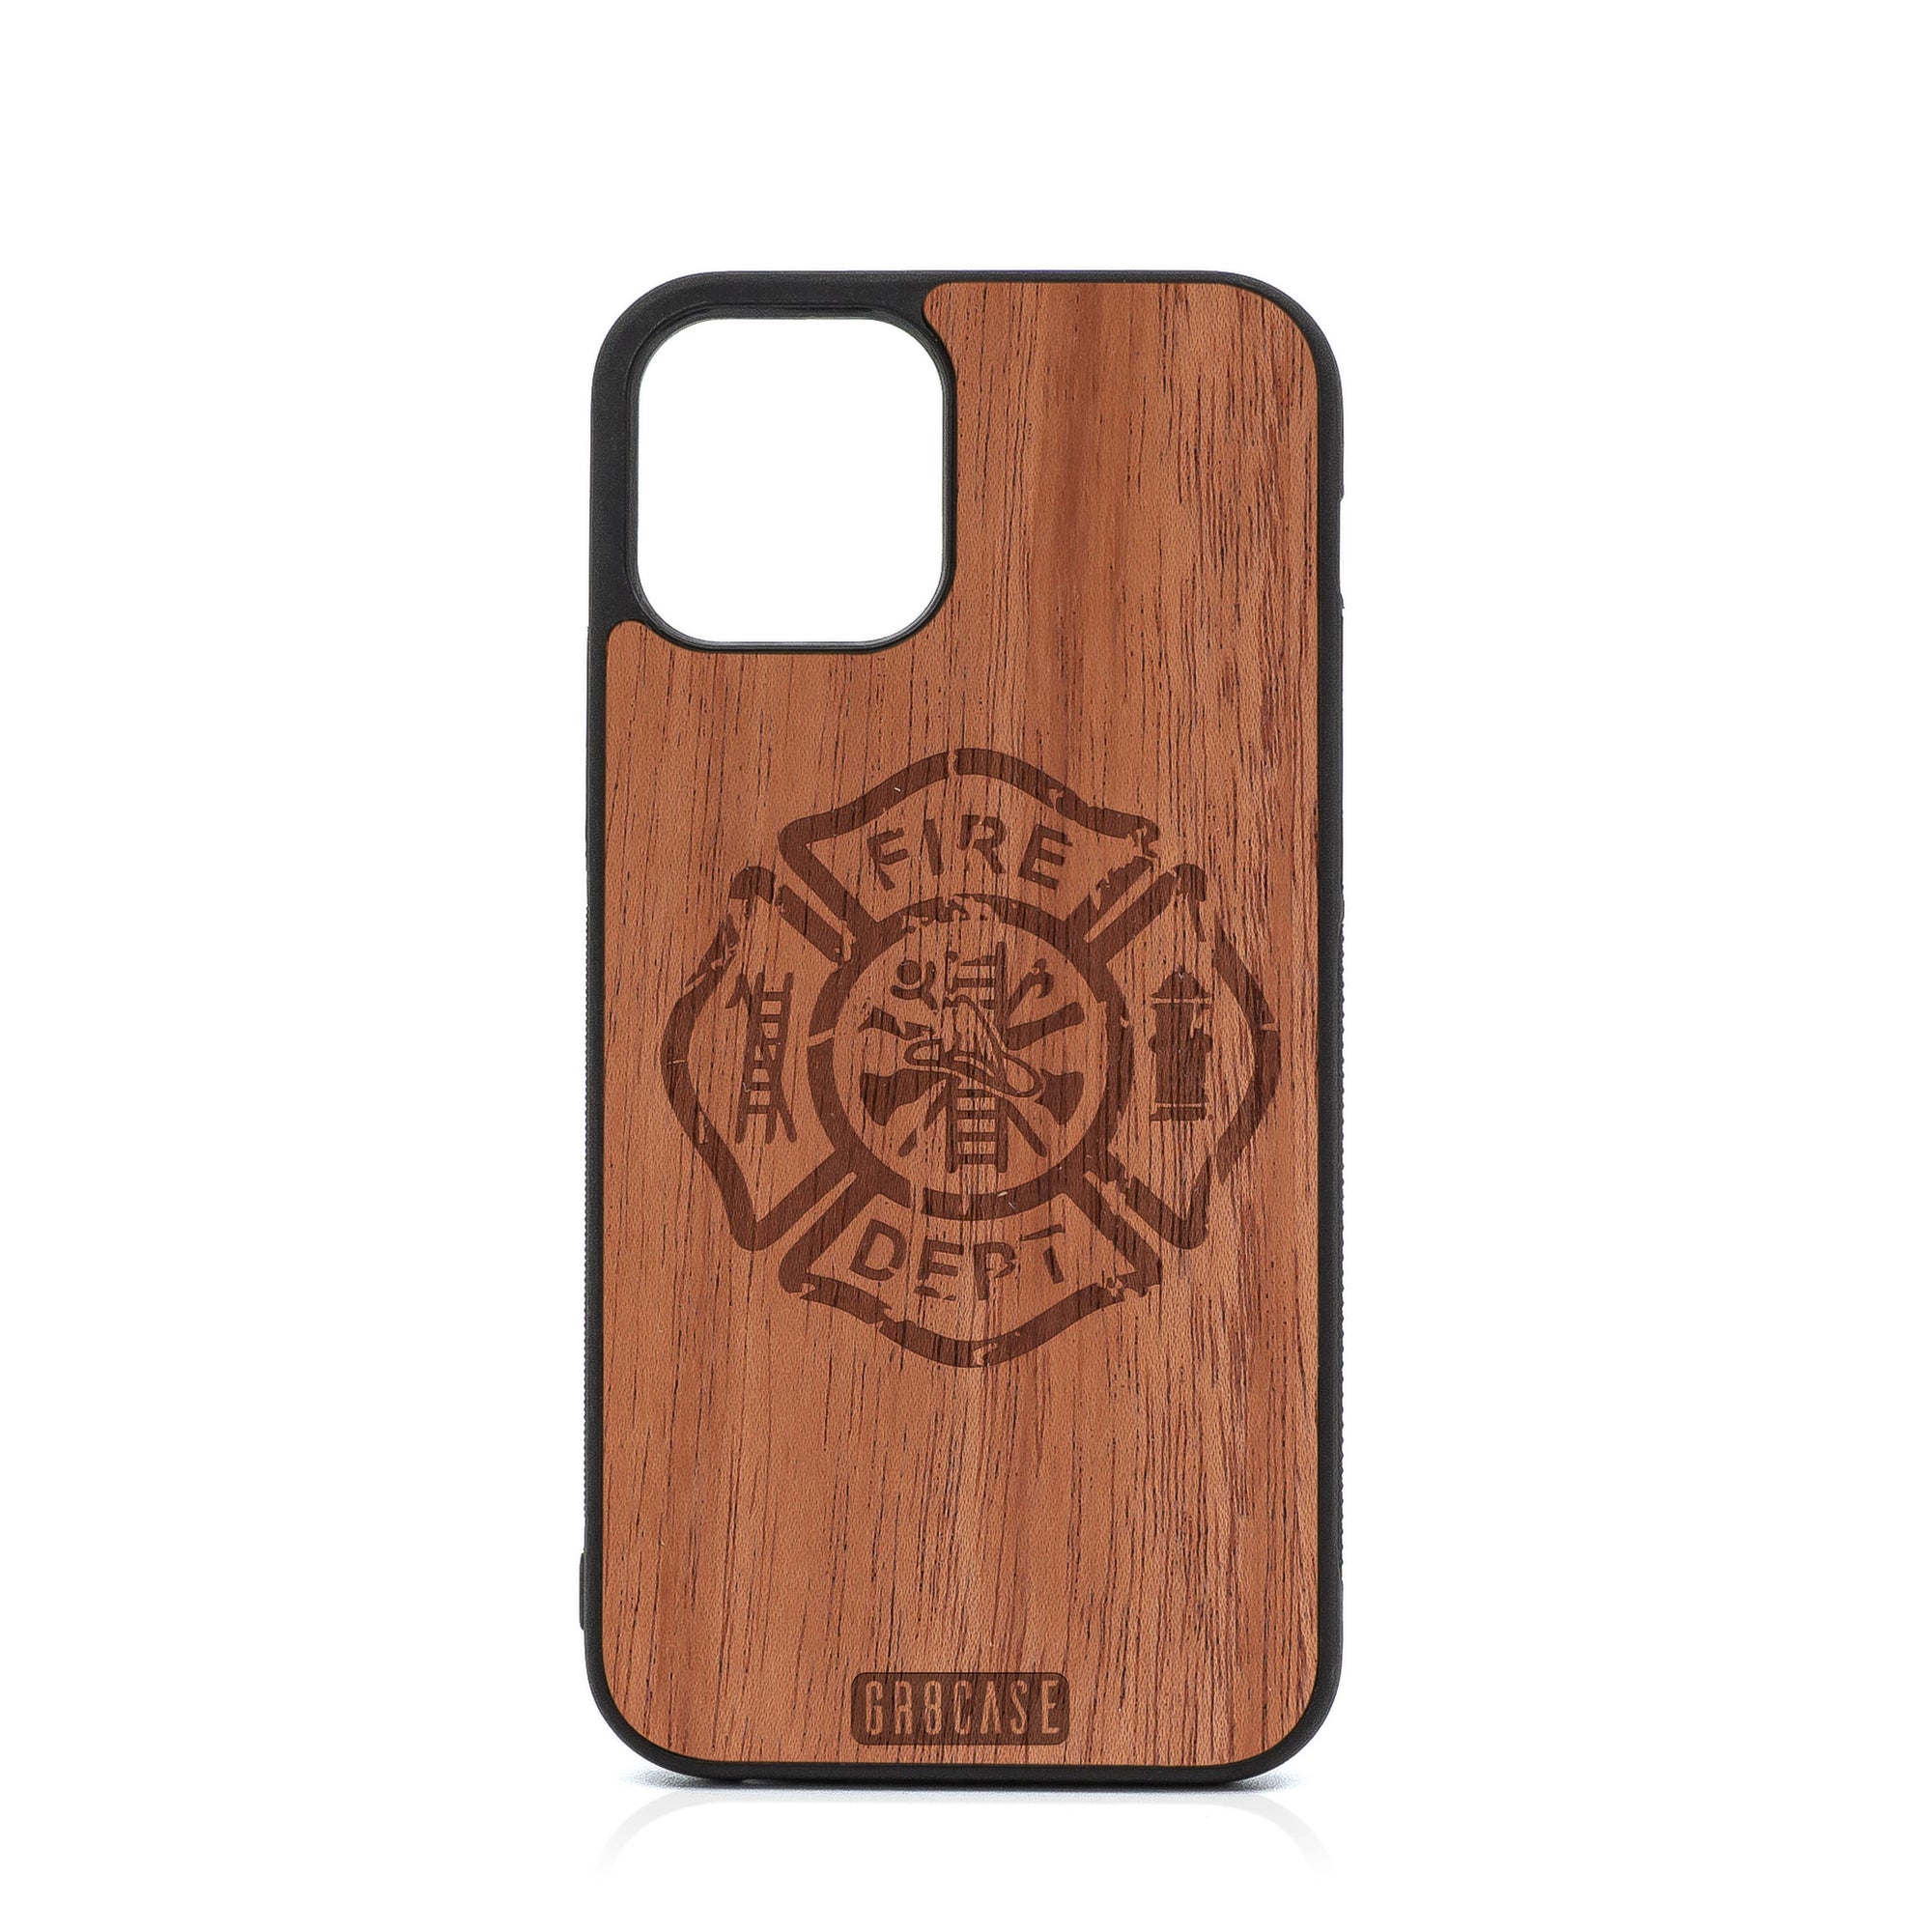 Fire Department Design Wood Case For iPhone 12